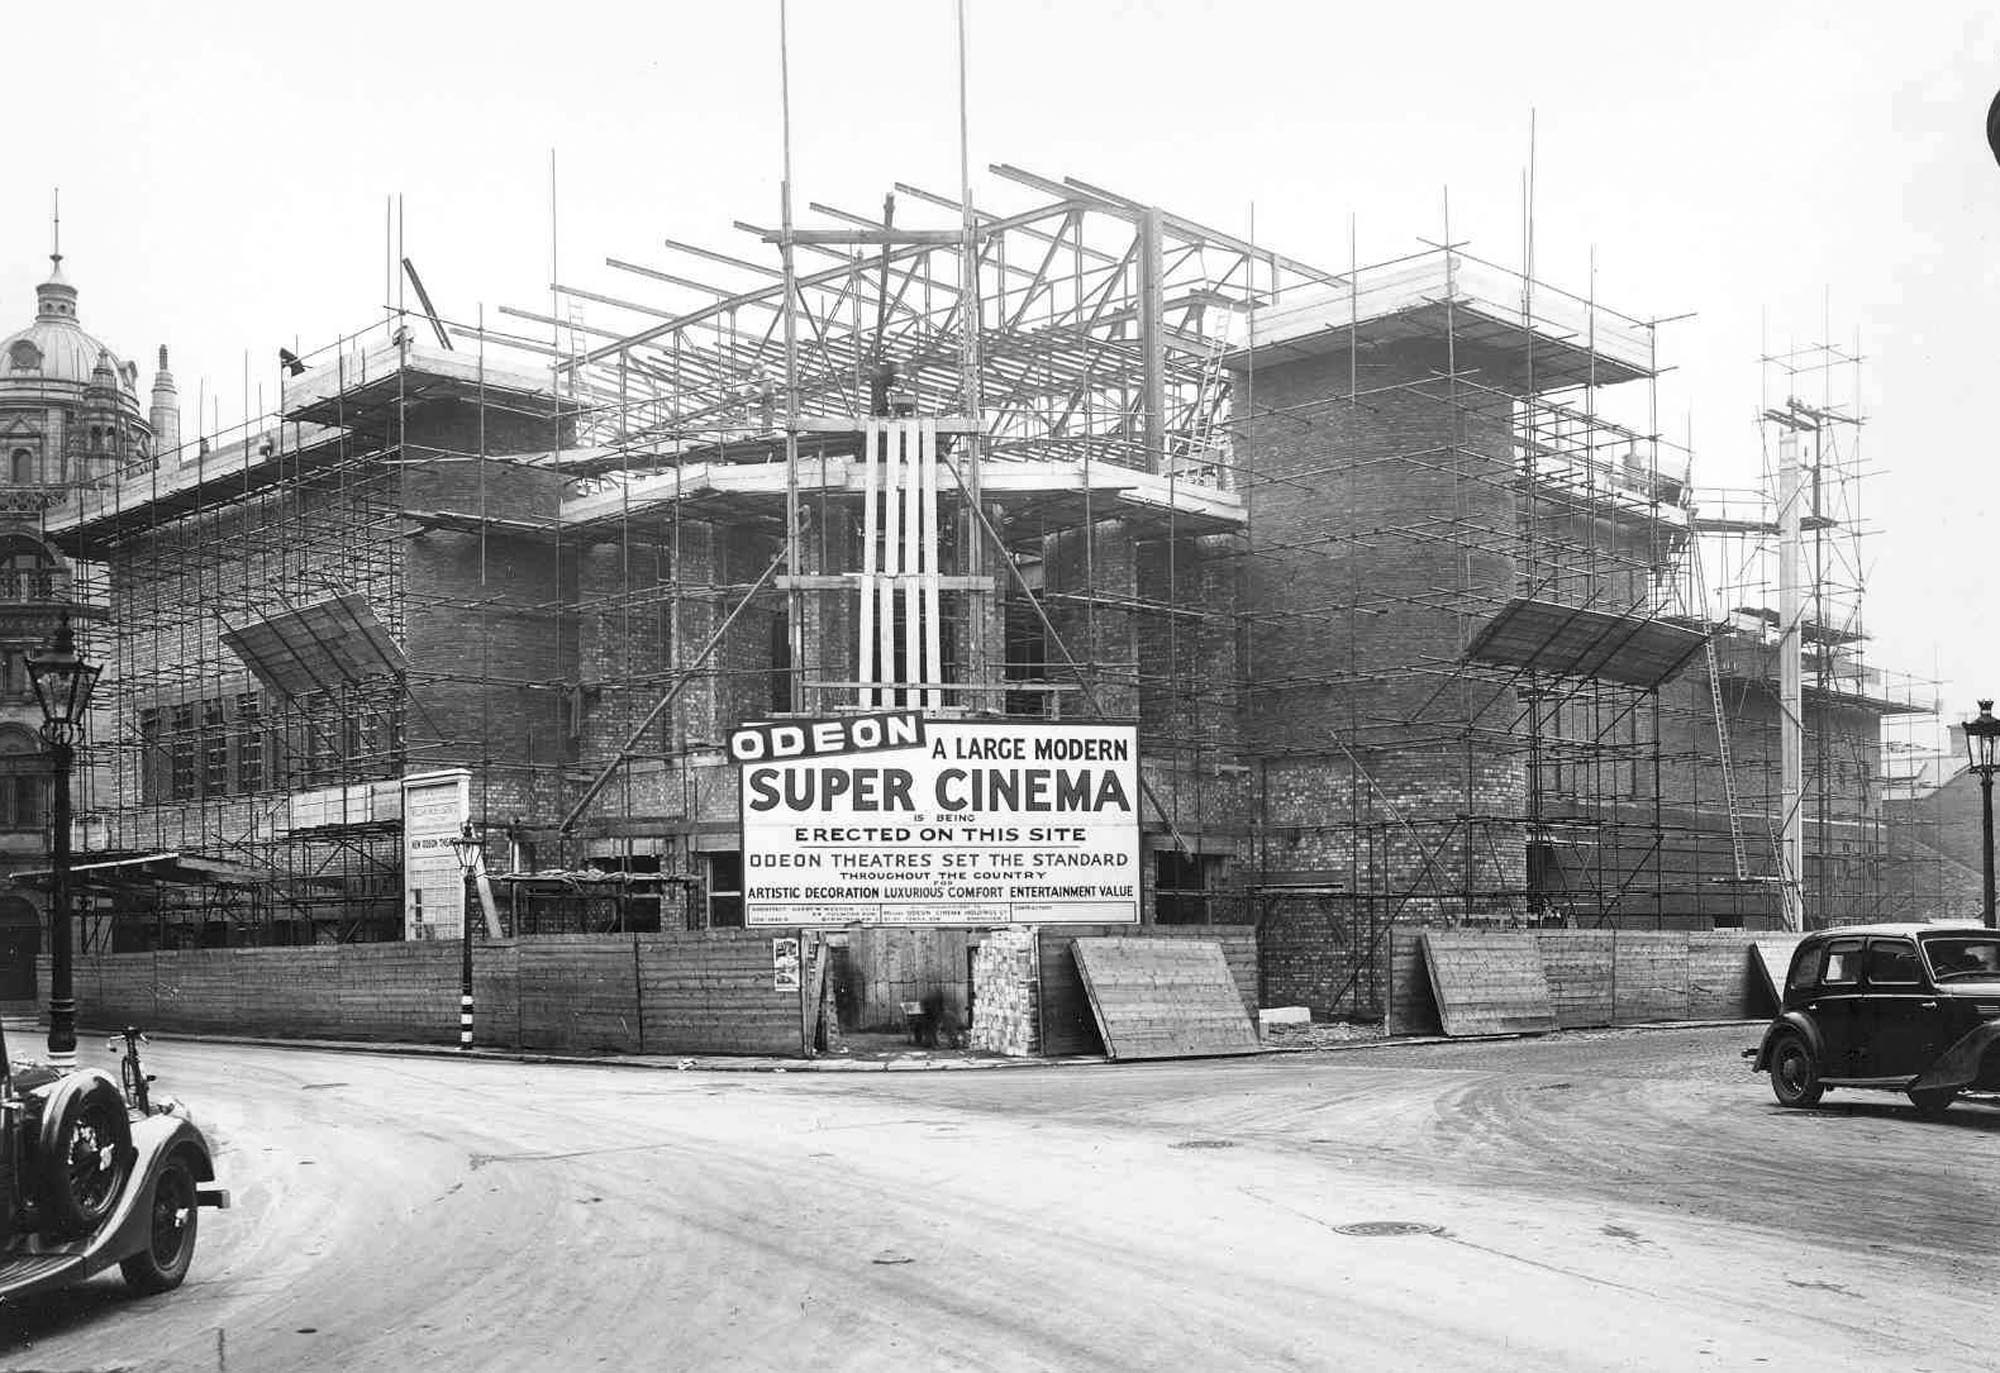 The cinema from the front during construction, 1937 - Affective Digital Histories, University of Leicester